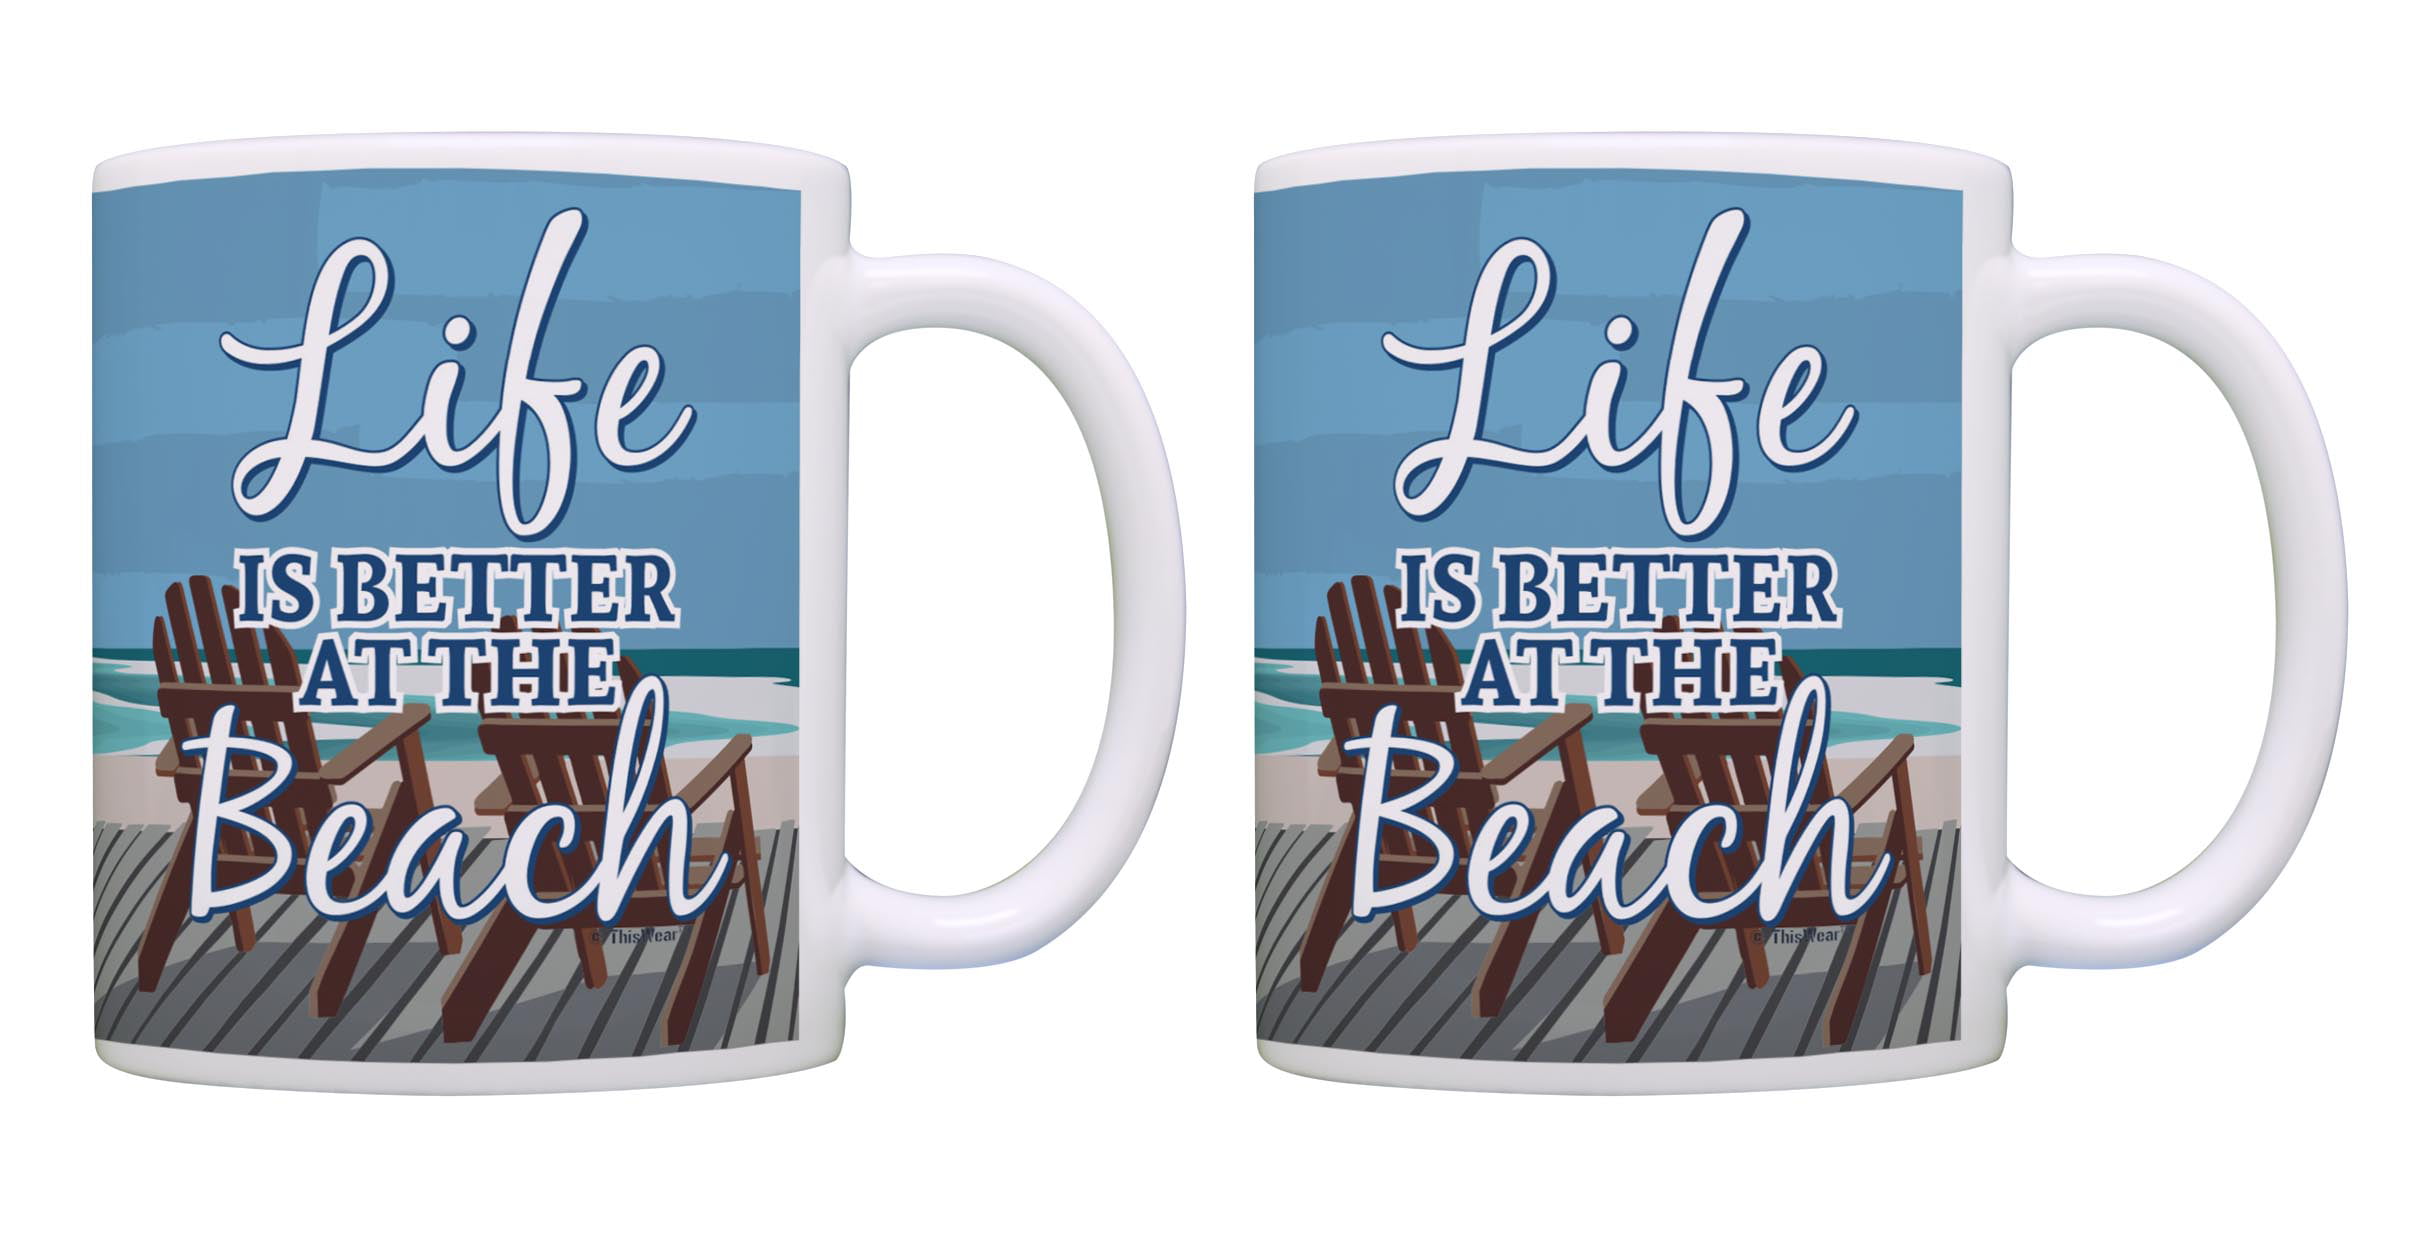 The Beach Is Calling and I Must Go Glossy White 10 Ounce Enamelware Mug Set of 2